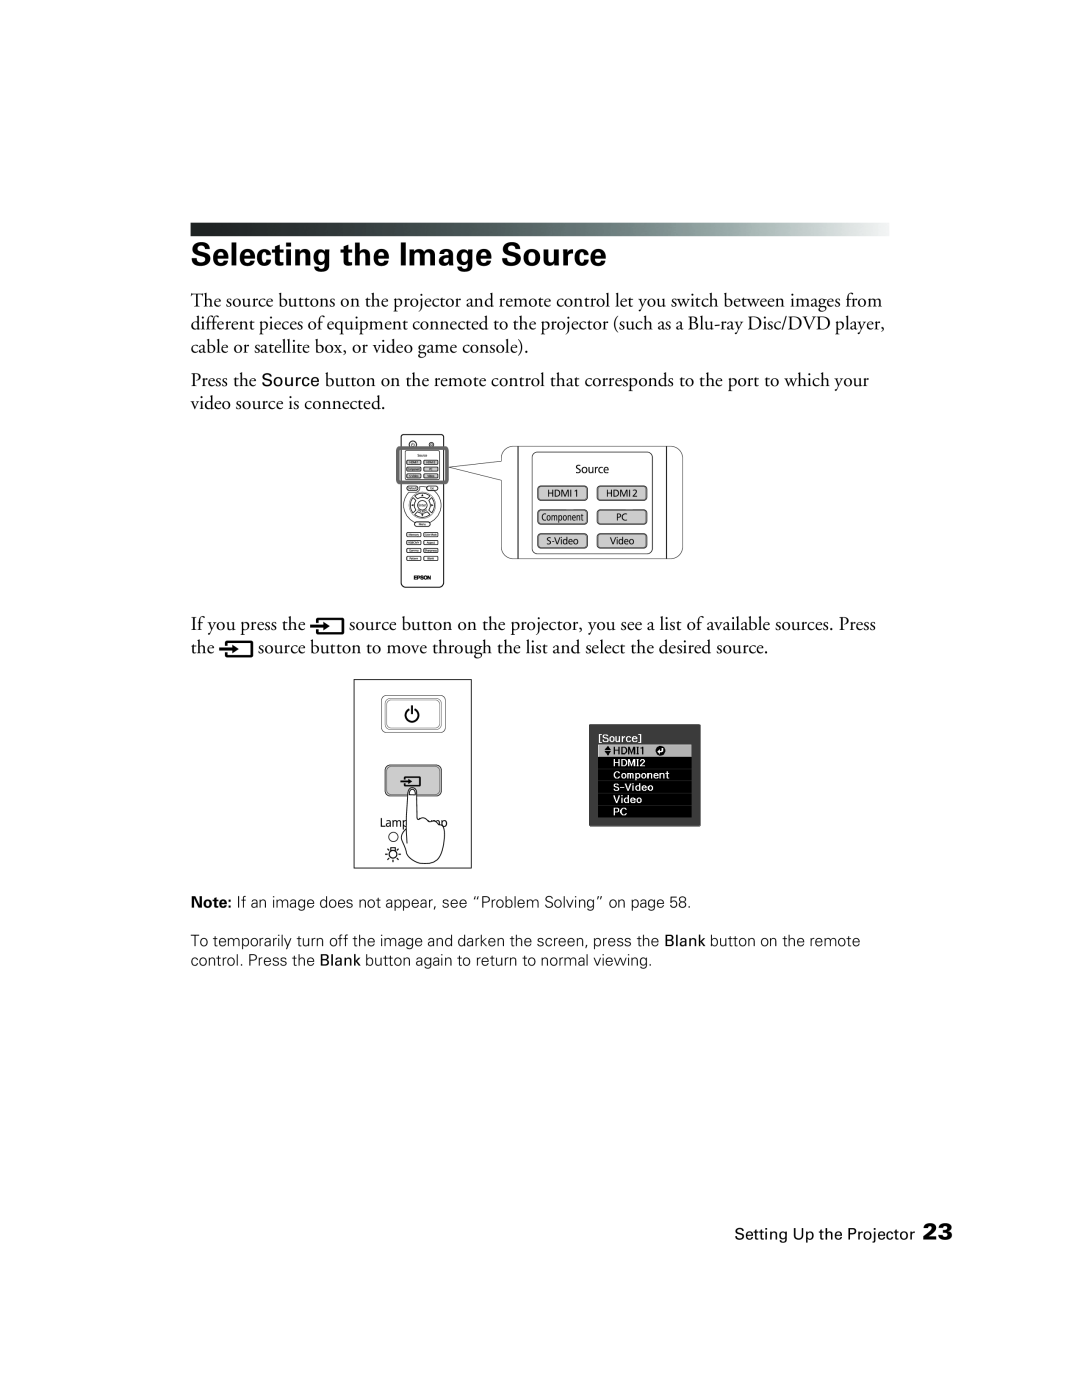 Epson 9700, 9350 manual Selecting the Image Source 